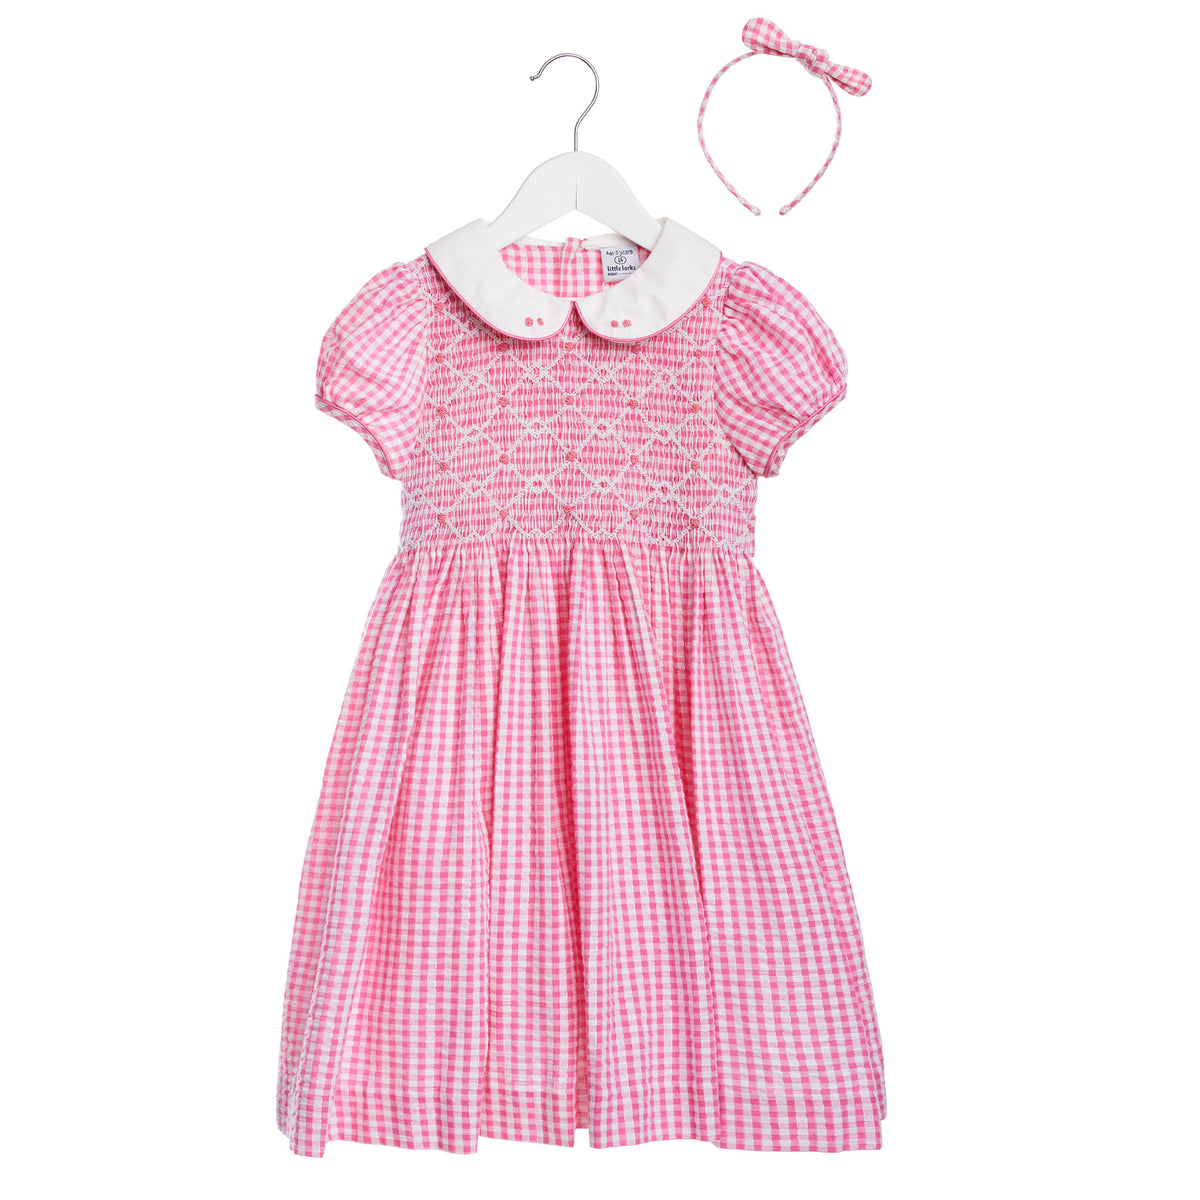 Rosie Dress with matching hairband